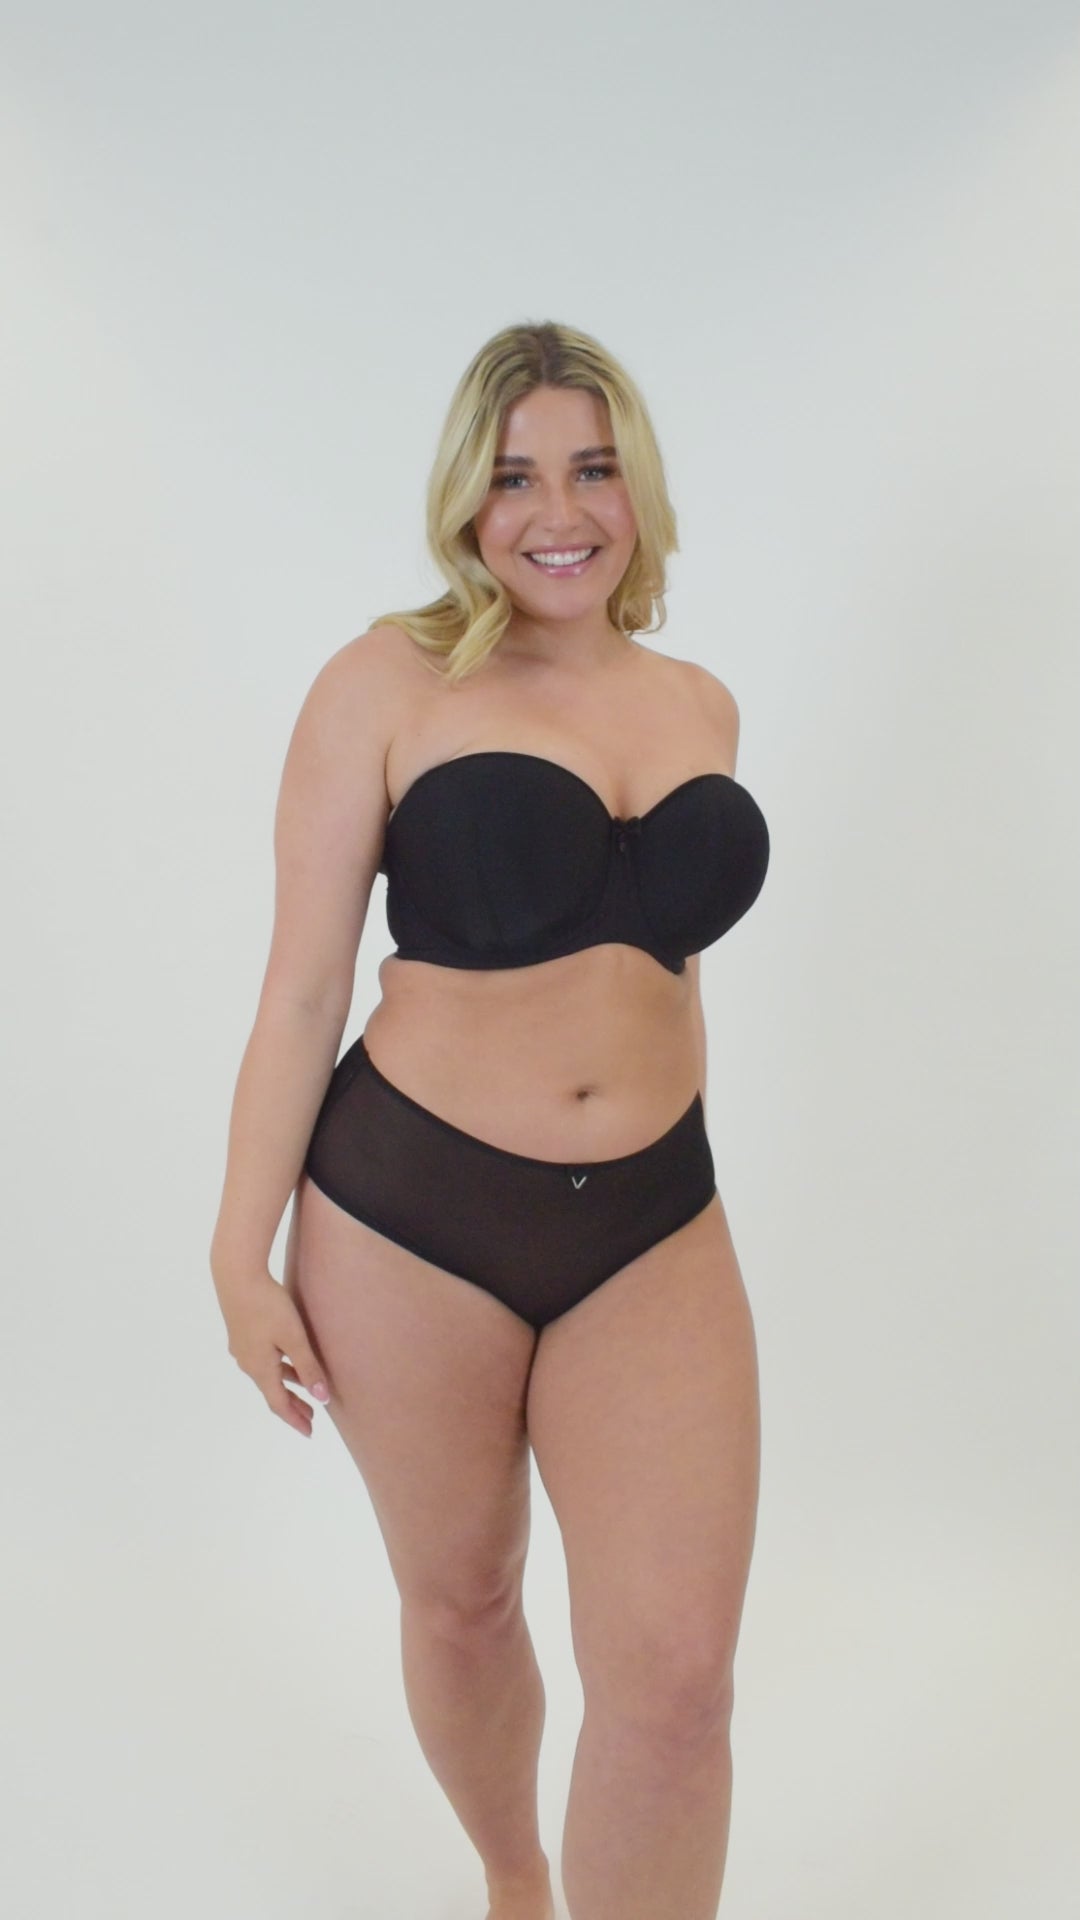 Curvy Kate - Never having to pull up a strapless again